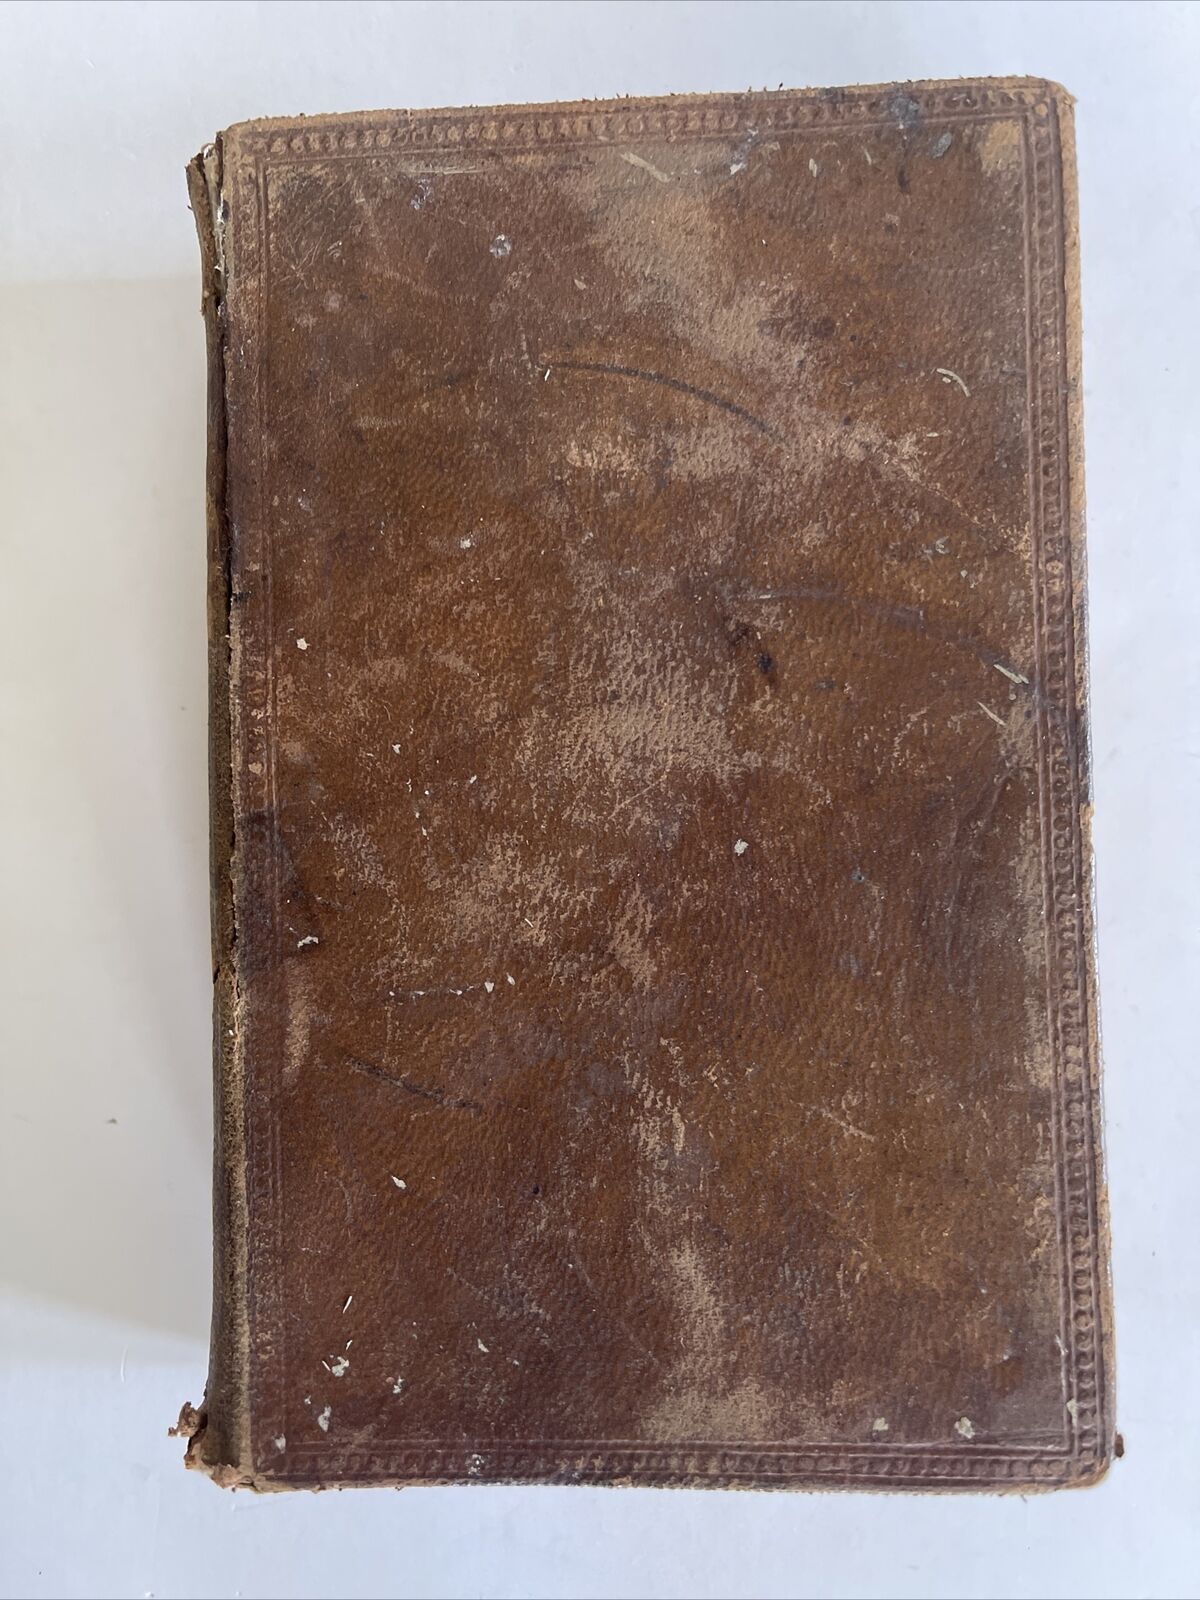 Antique 1871 Leather Prayer Spiritual Songs Baptist Hymn Book with Readings